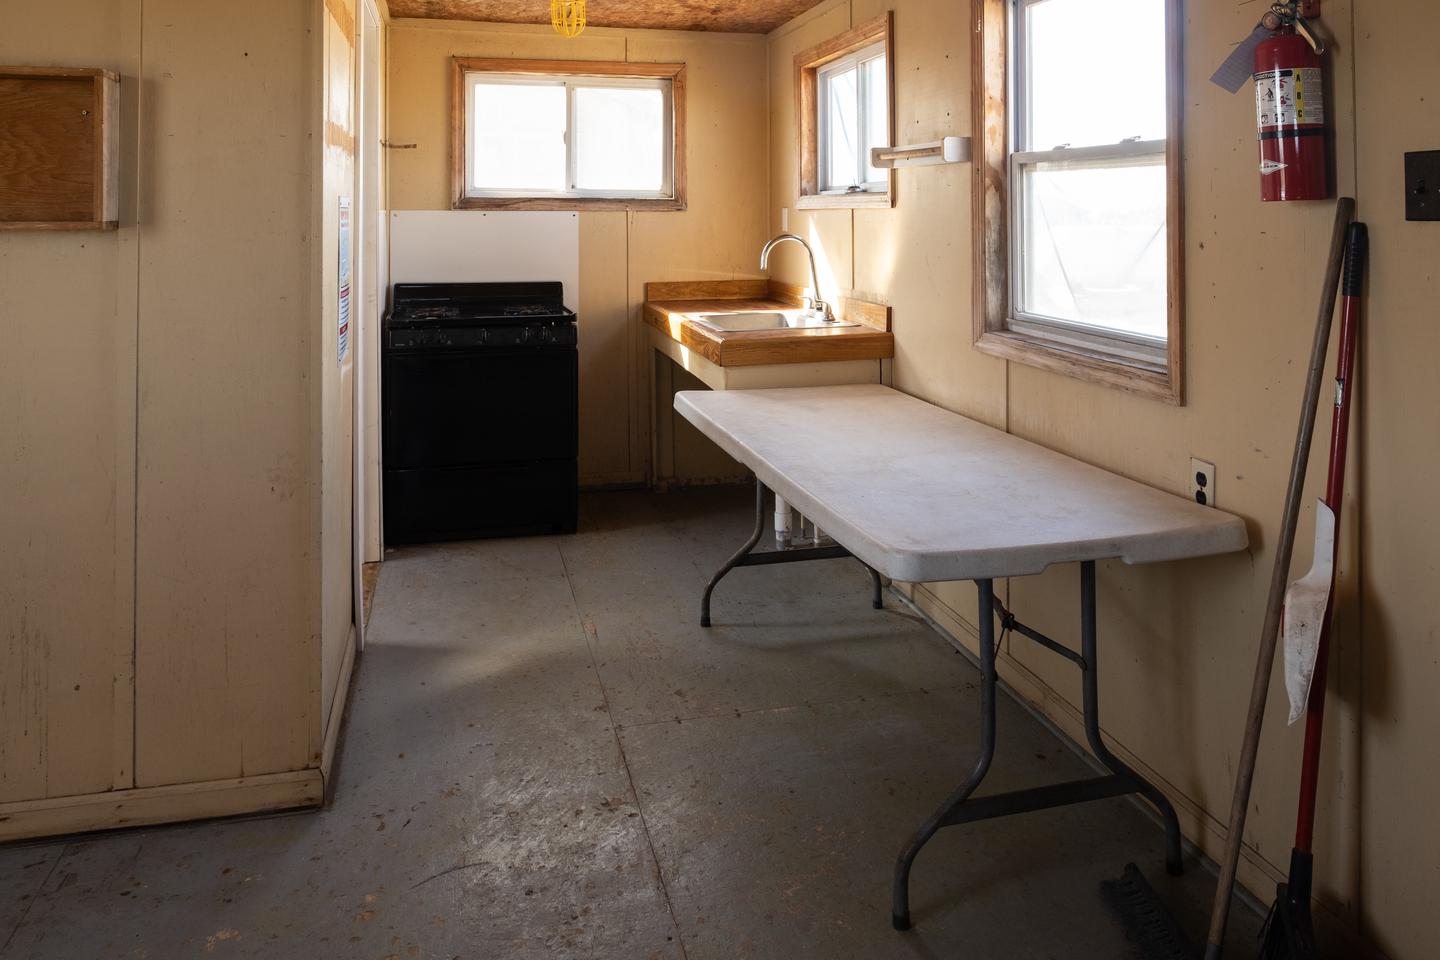 A view of the kitchen area, showing a table, sink, countertop, and propane range.Kitchen area.